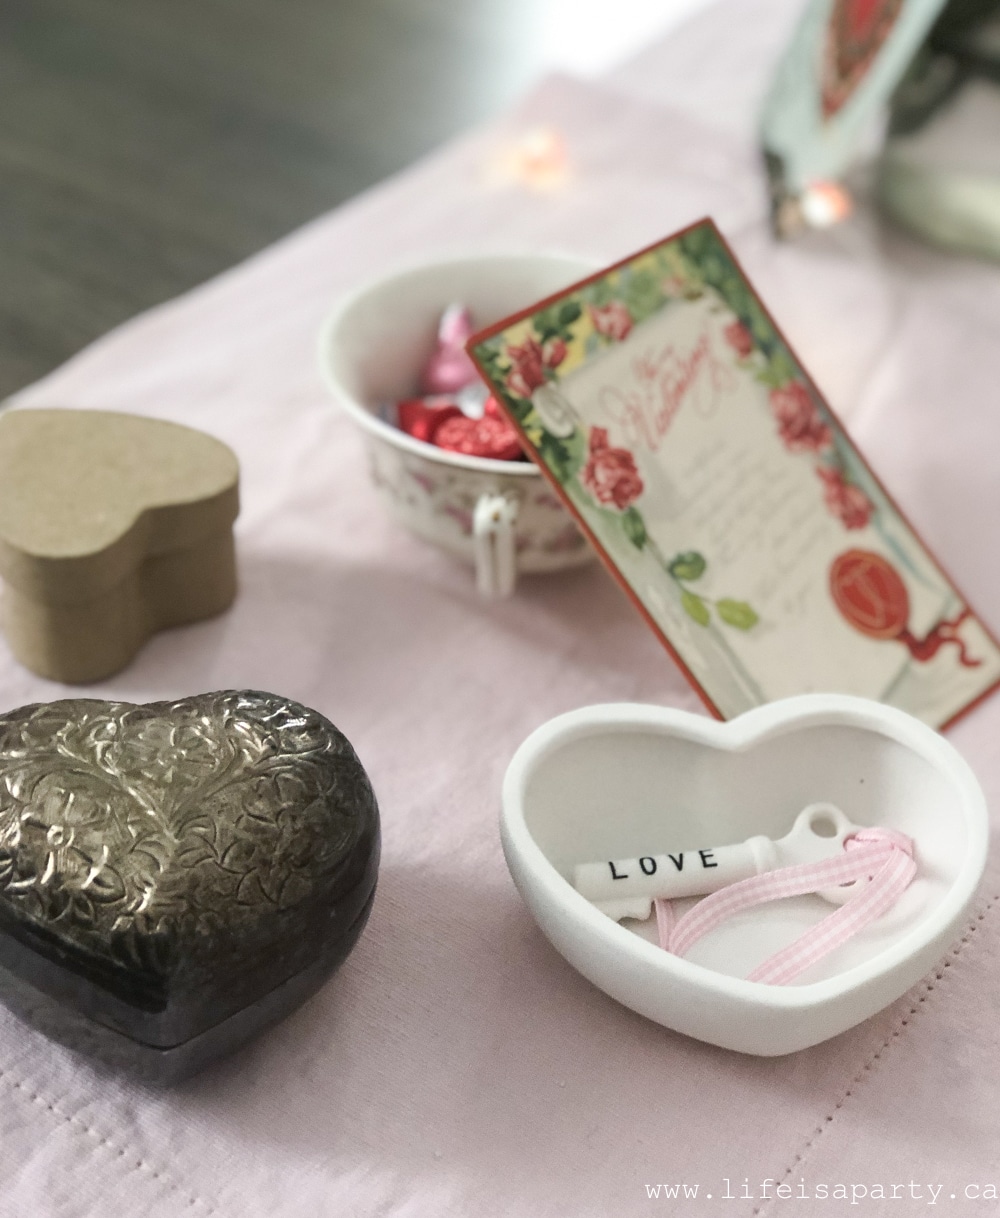 Valentine's Day Eclectic Table -Valentine's Day Table inspired by antique post cards and collected romantic treasures. Perfect for Galentine's Day.